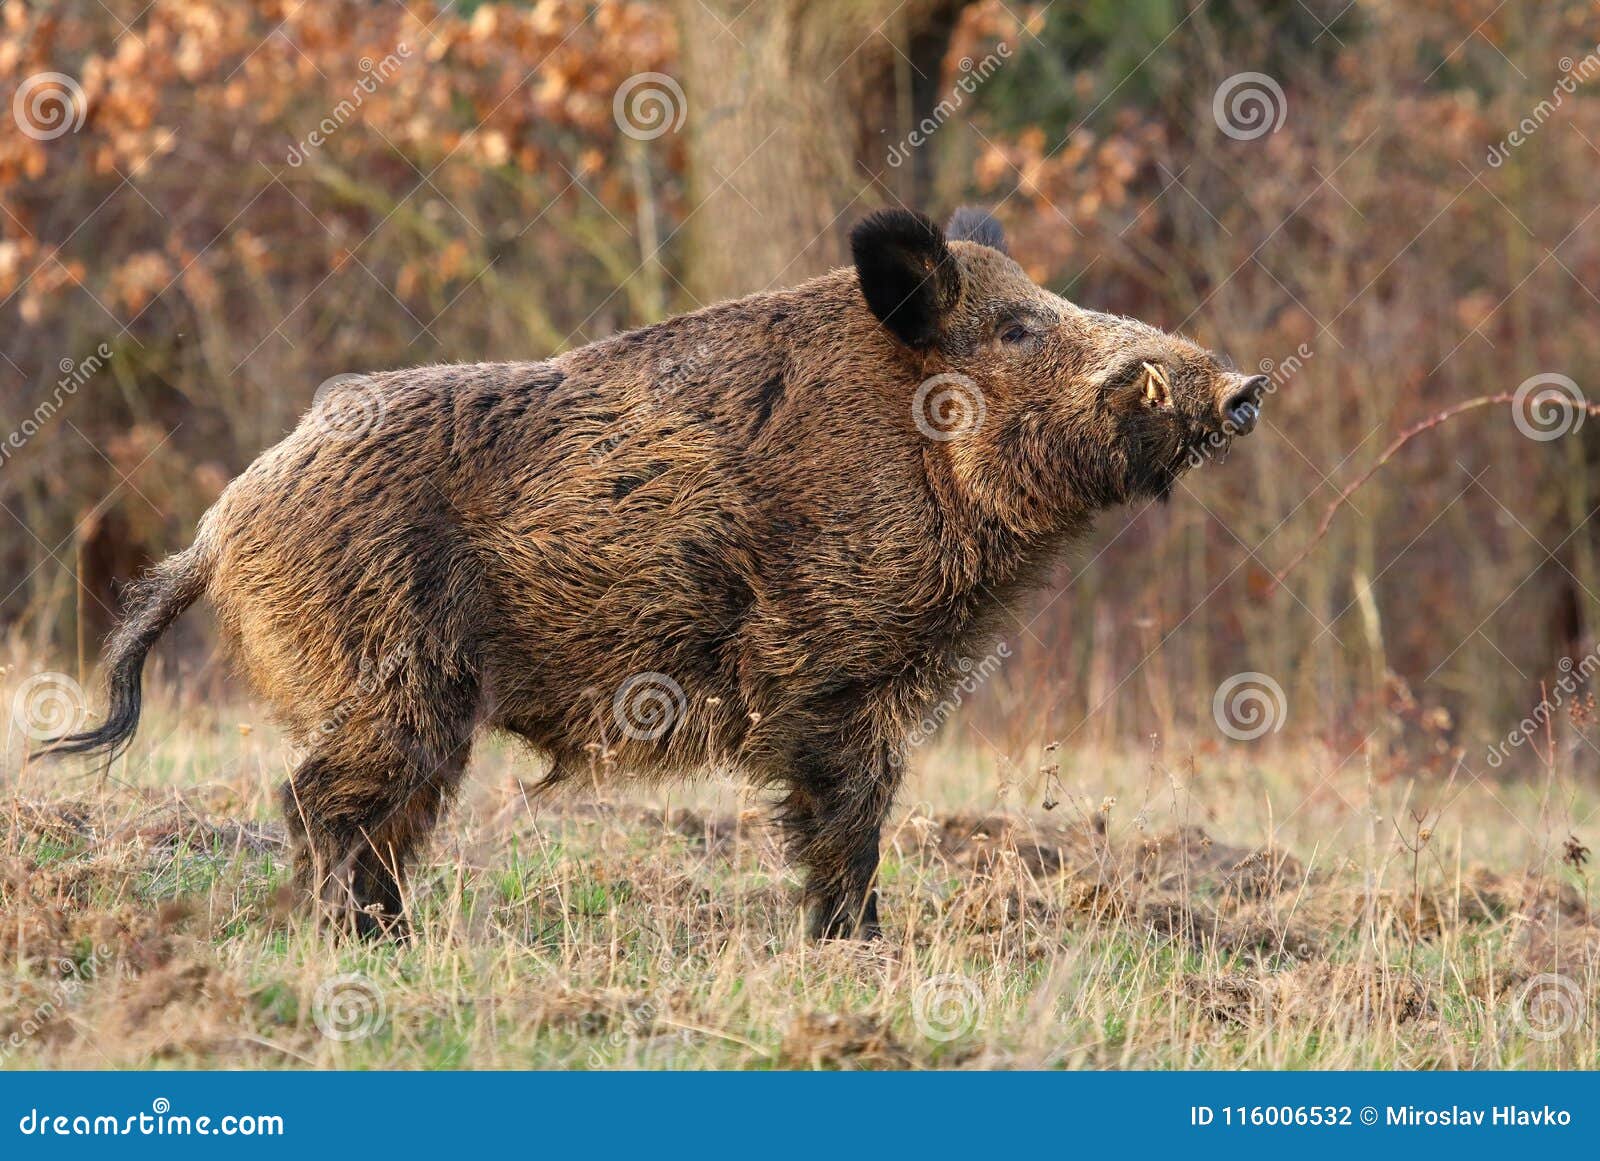 Adult Wild Boar Sus Scrofa Stock Photo Image Of Hairy 116006532